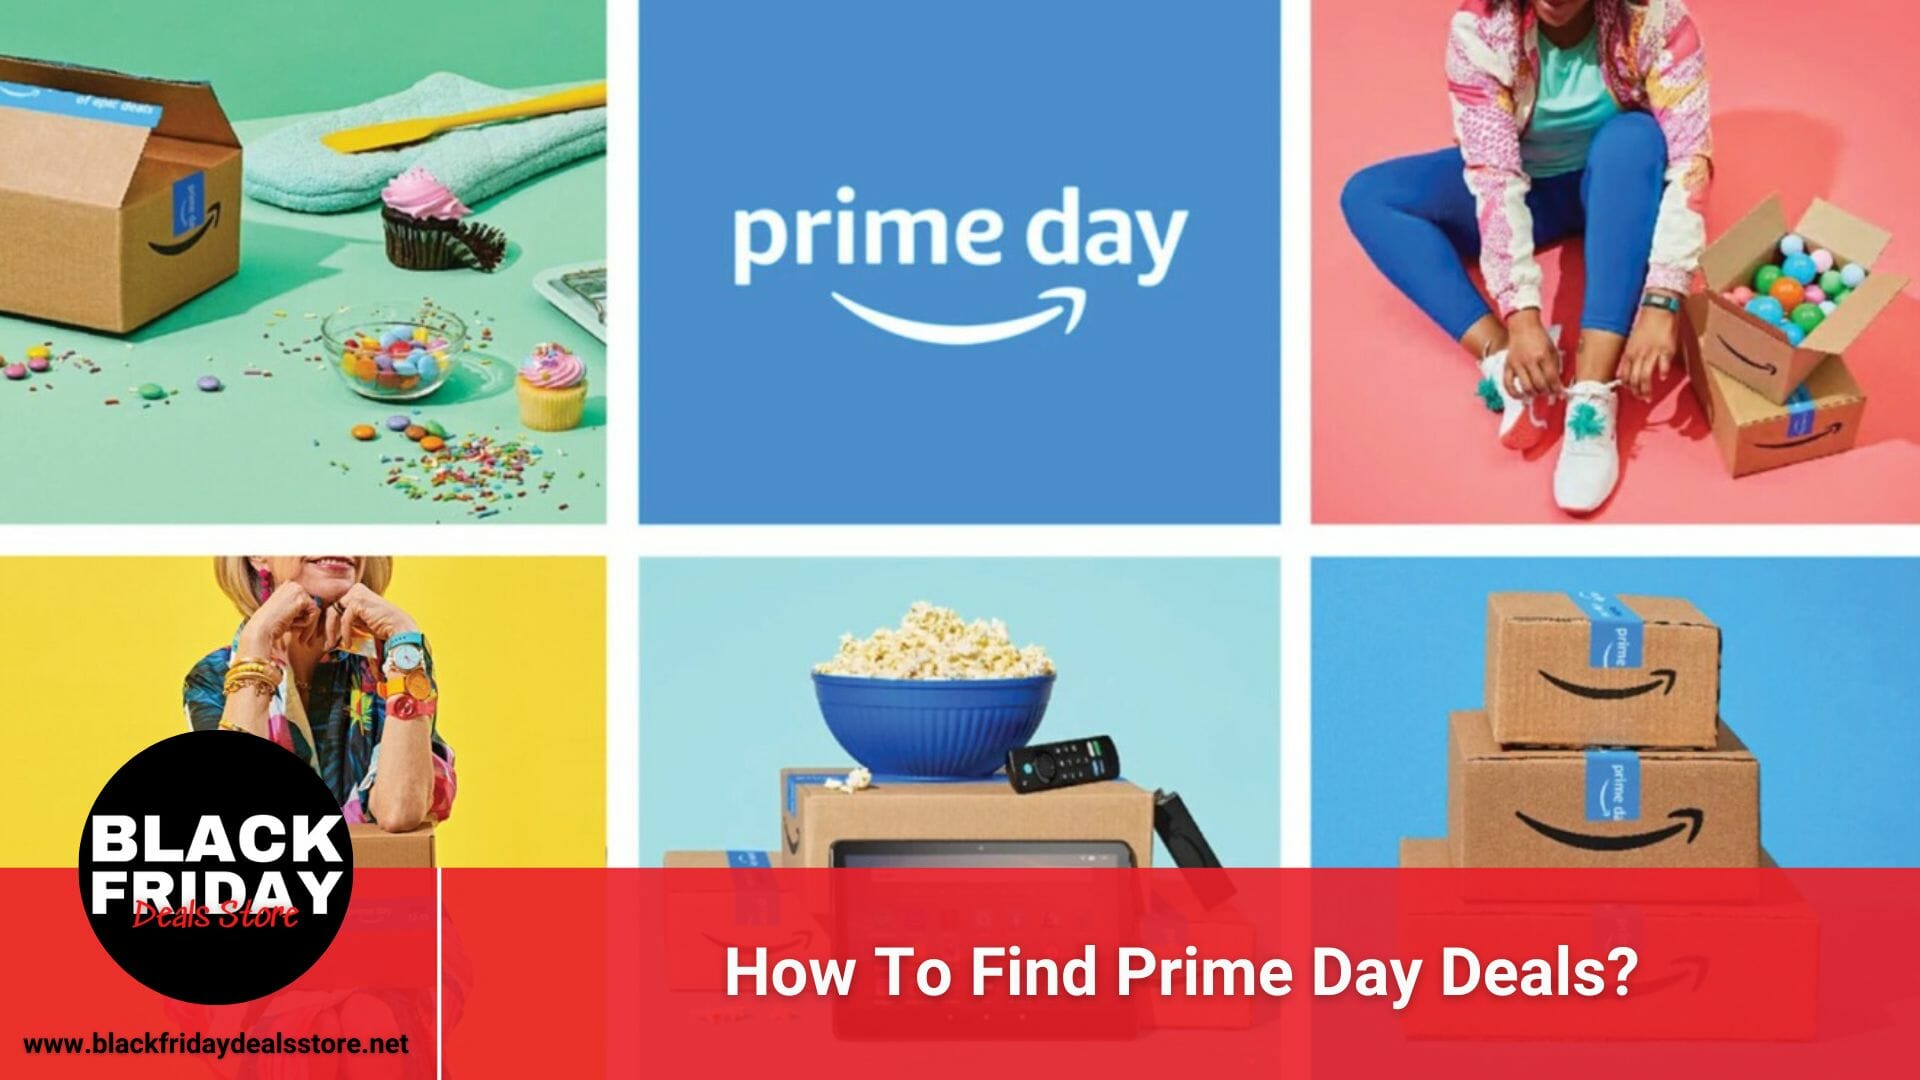 How To Find Prime Day Deals